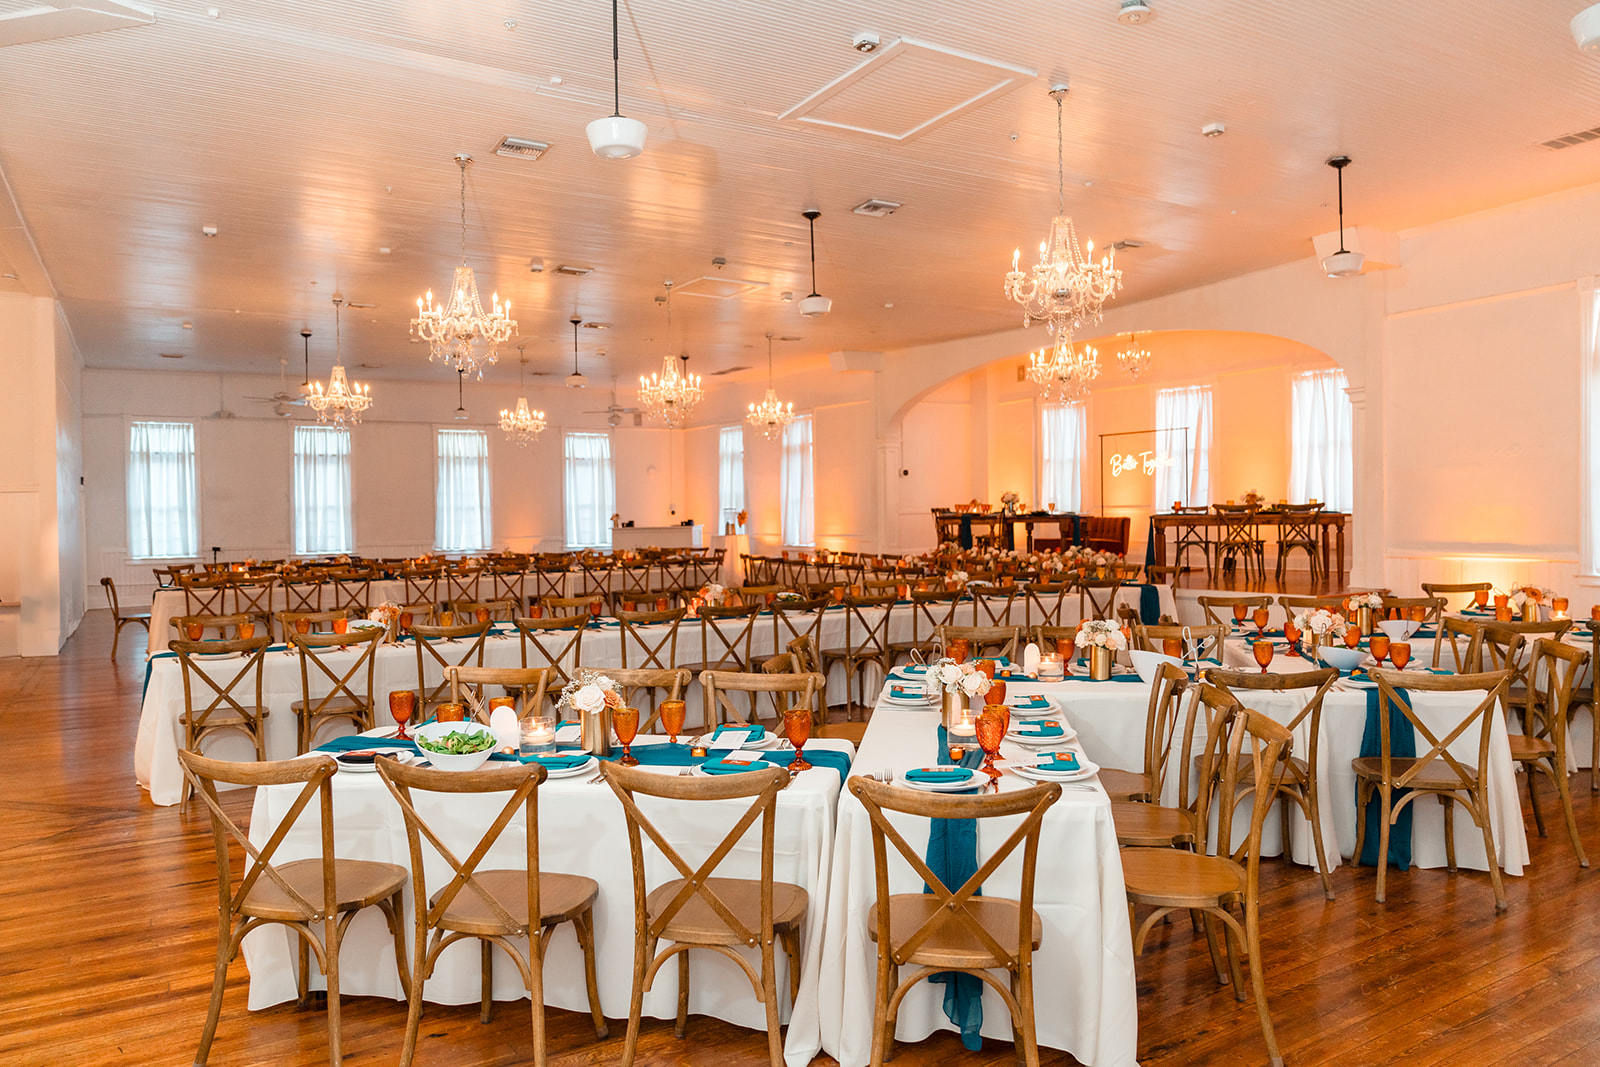 Reception hall at Venue 1902 adorned with chandeliers, decorated tables, and a stage set for the newlyweds.